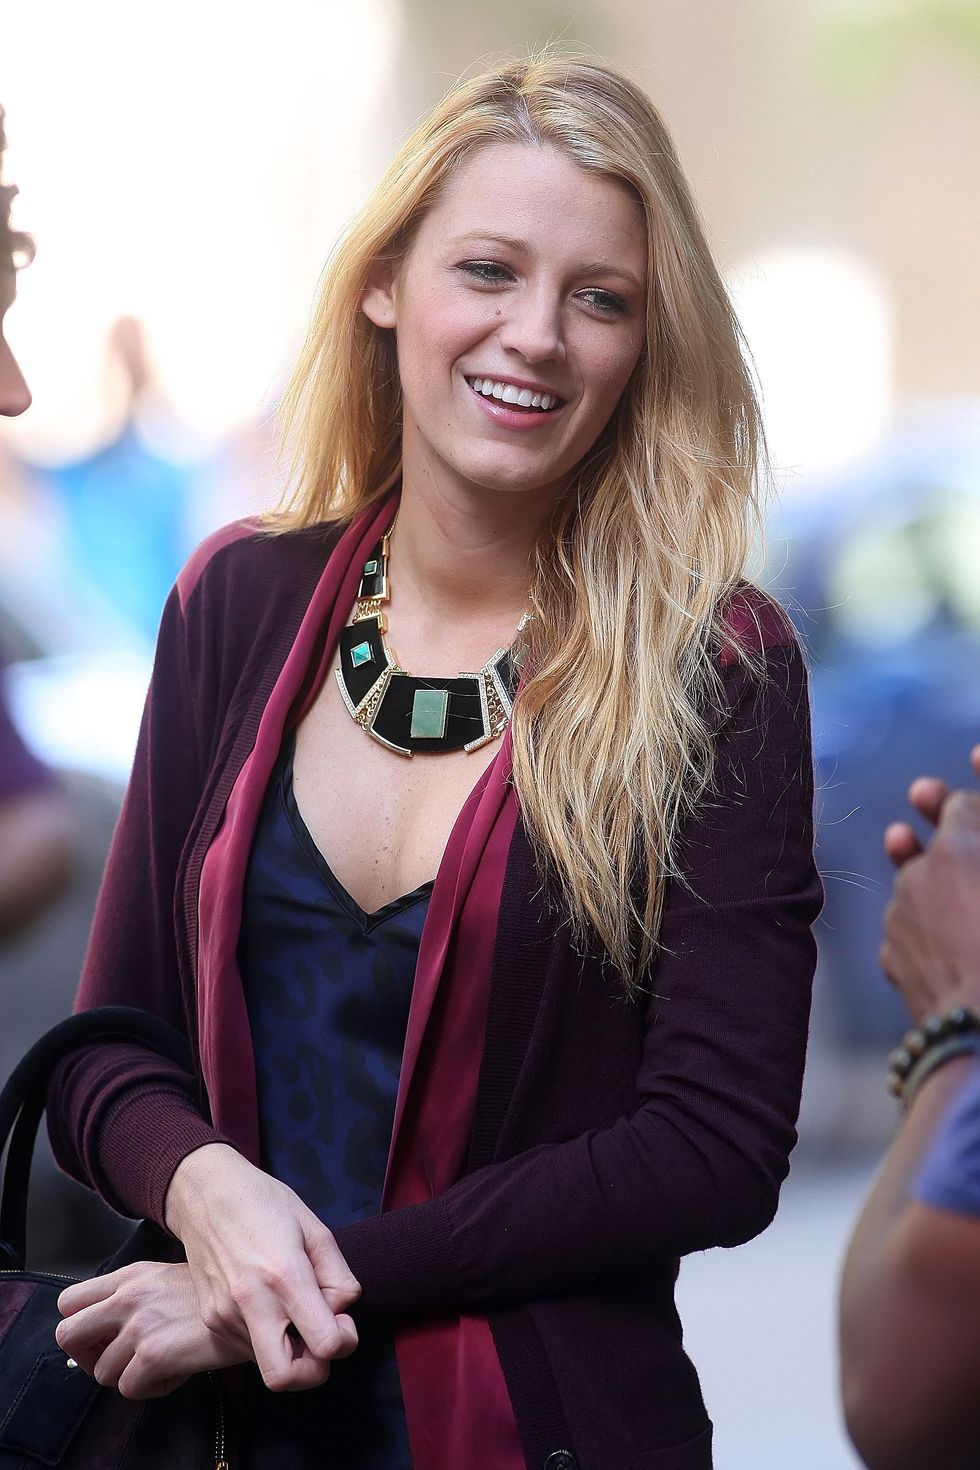 NEW YORK, NY - AUGUST 28: Blake Lively is seen on the movie set of 'Gossip Girl' on August 28, 2012 in New York City.  (Photo by DISCIULLO/Bauer-Griffin/GC Images)